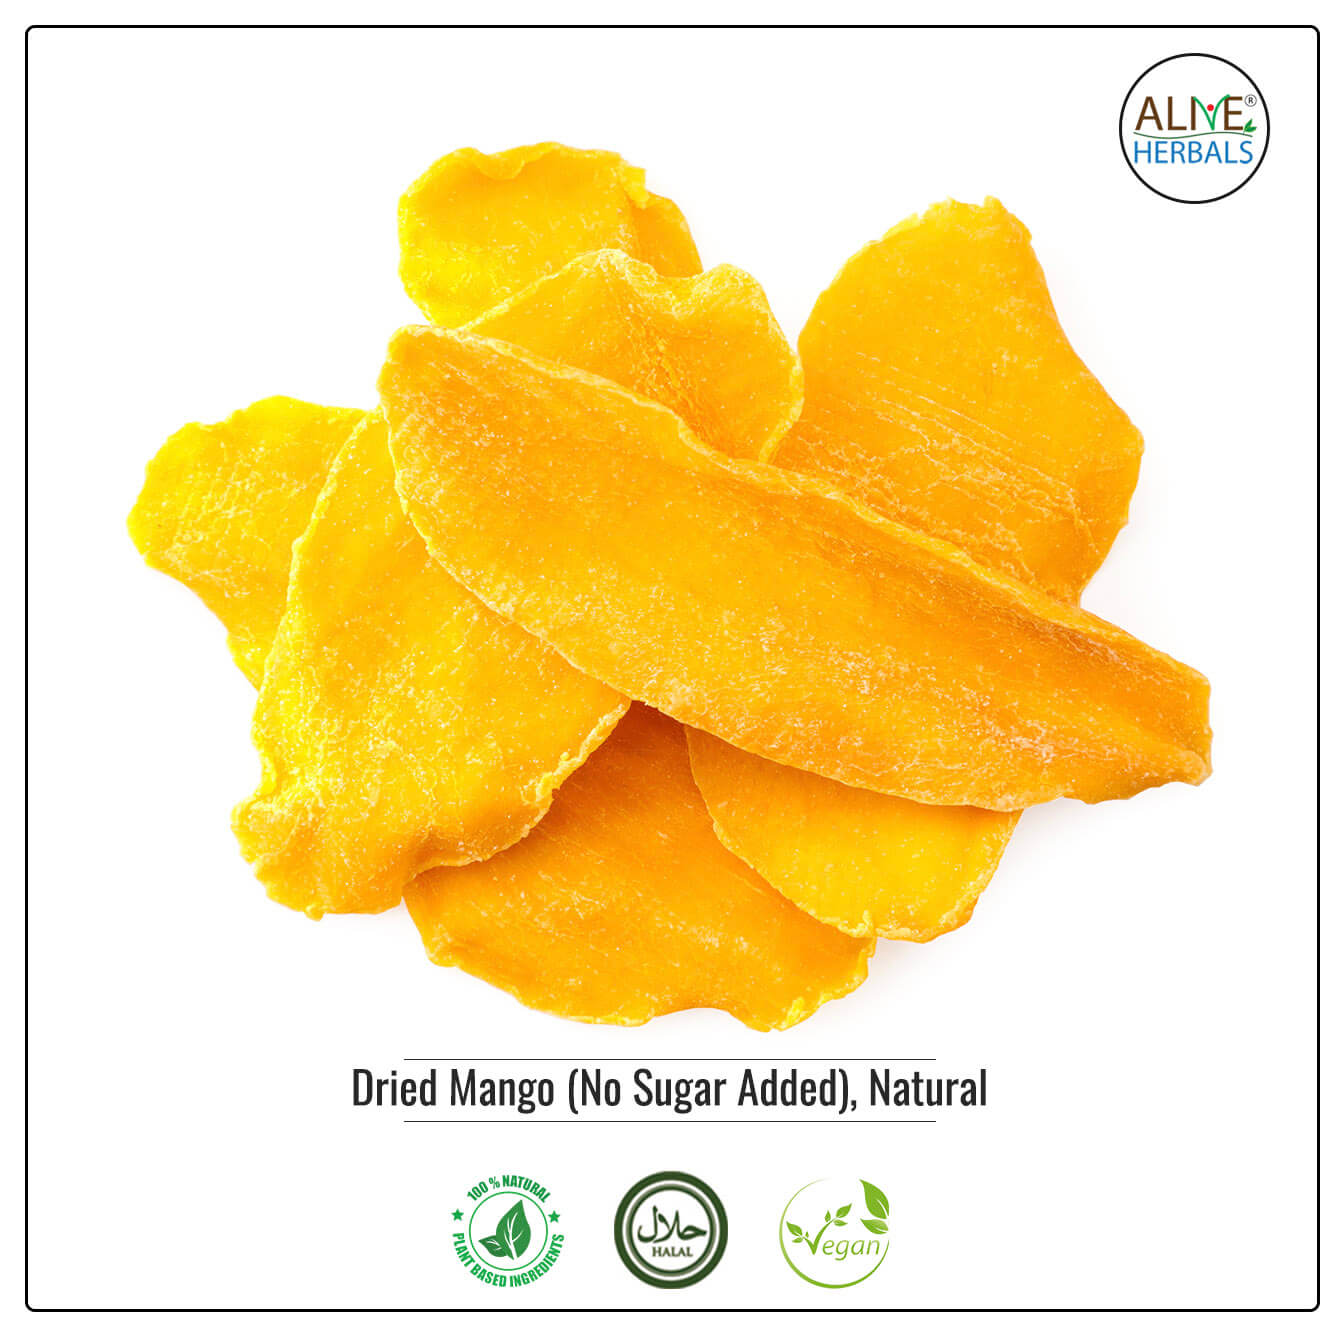  Mango Dried - Buy at the natural foods store in the USA - Alive Herbals